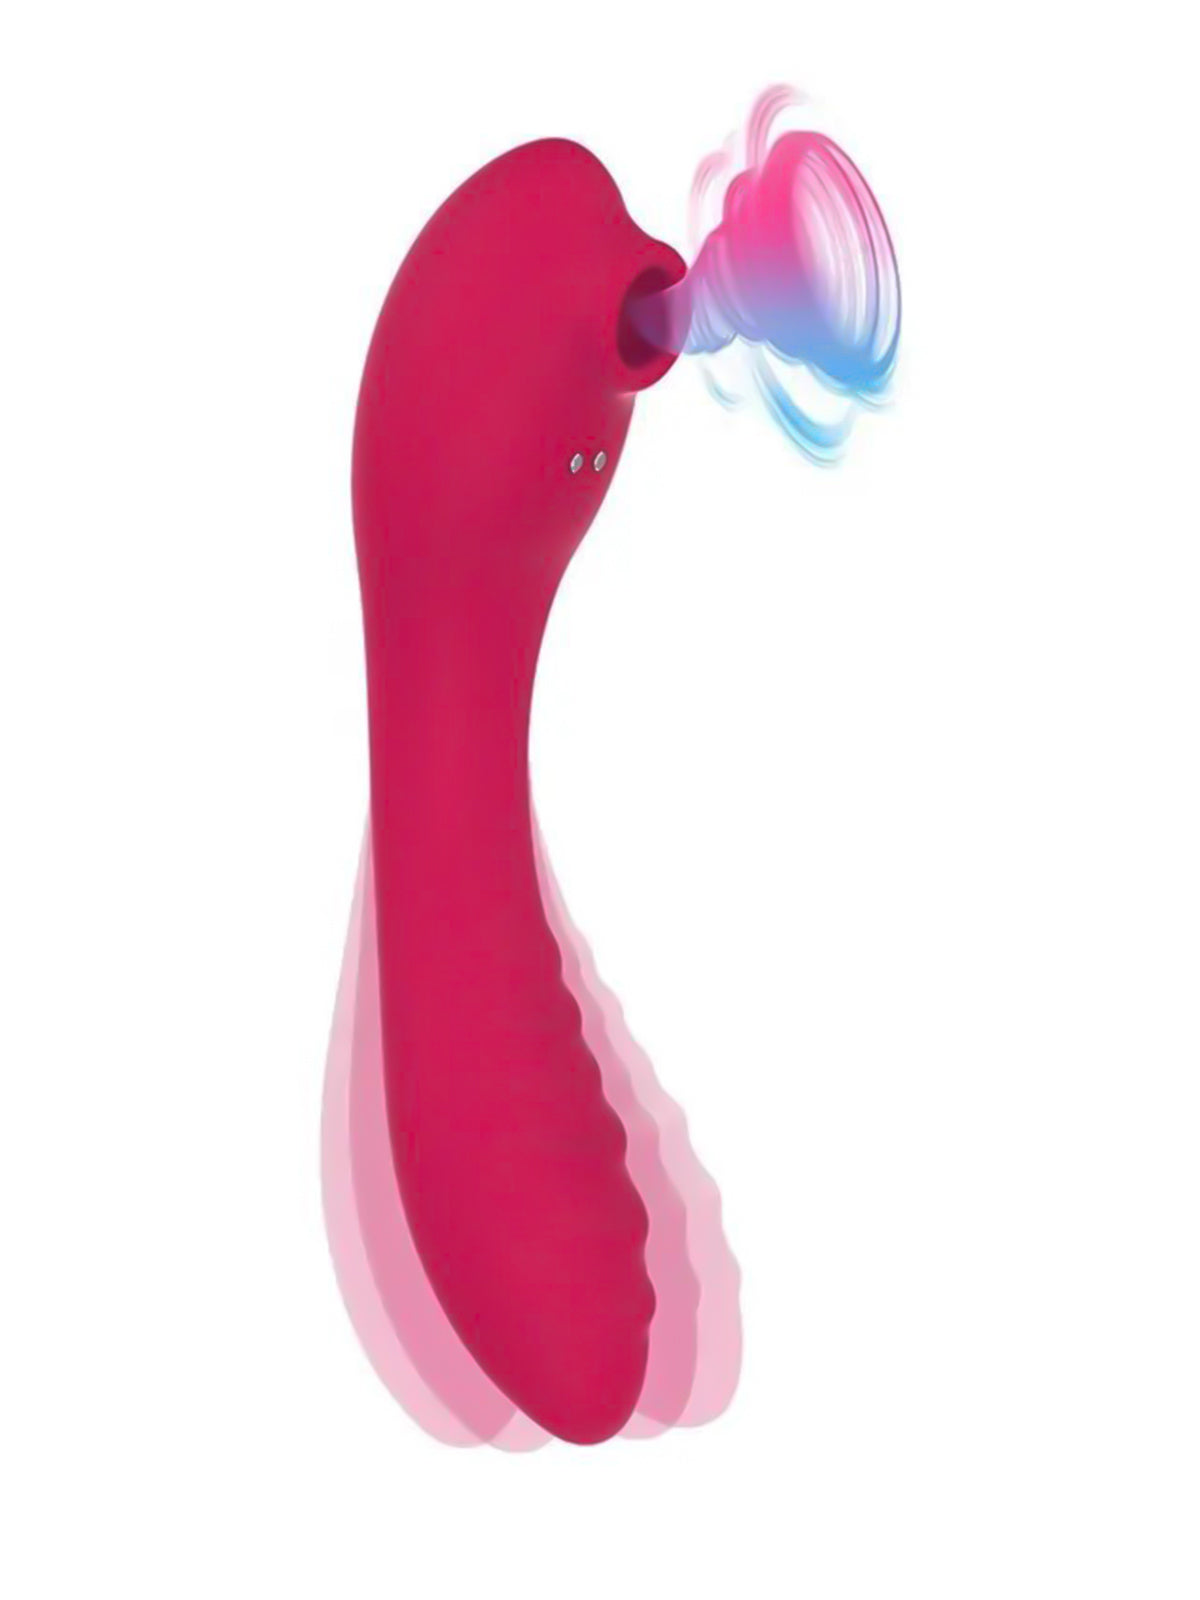 Flexible G - Spot Vibe with Heating Technology